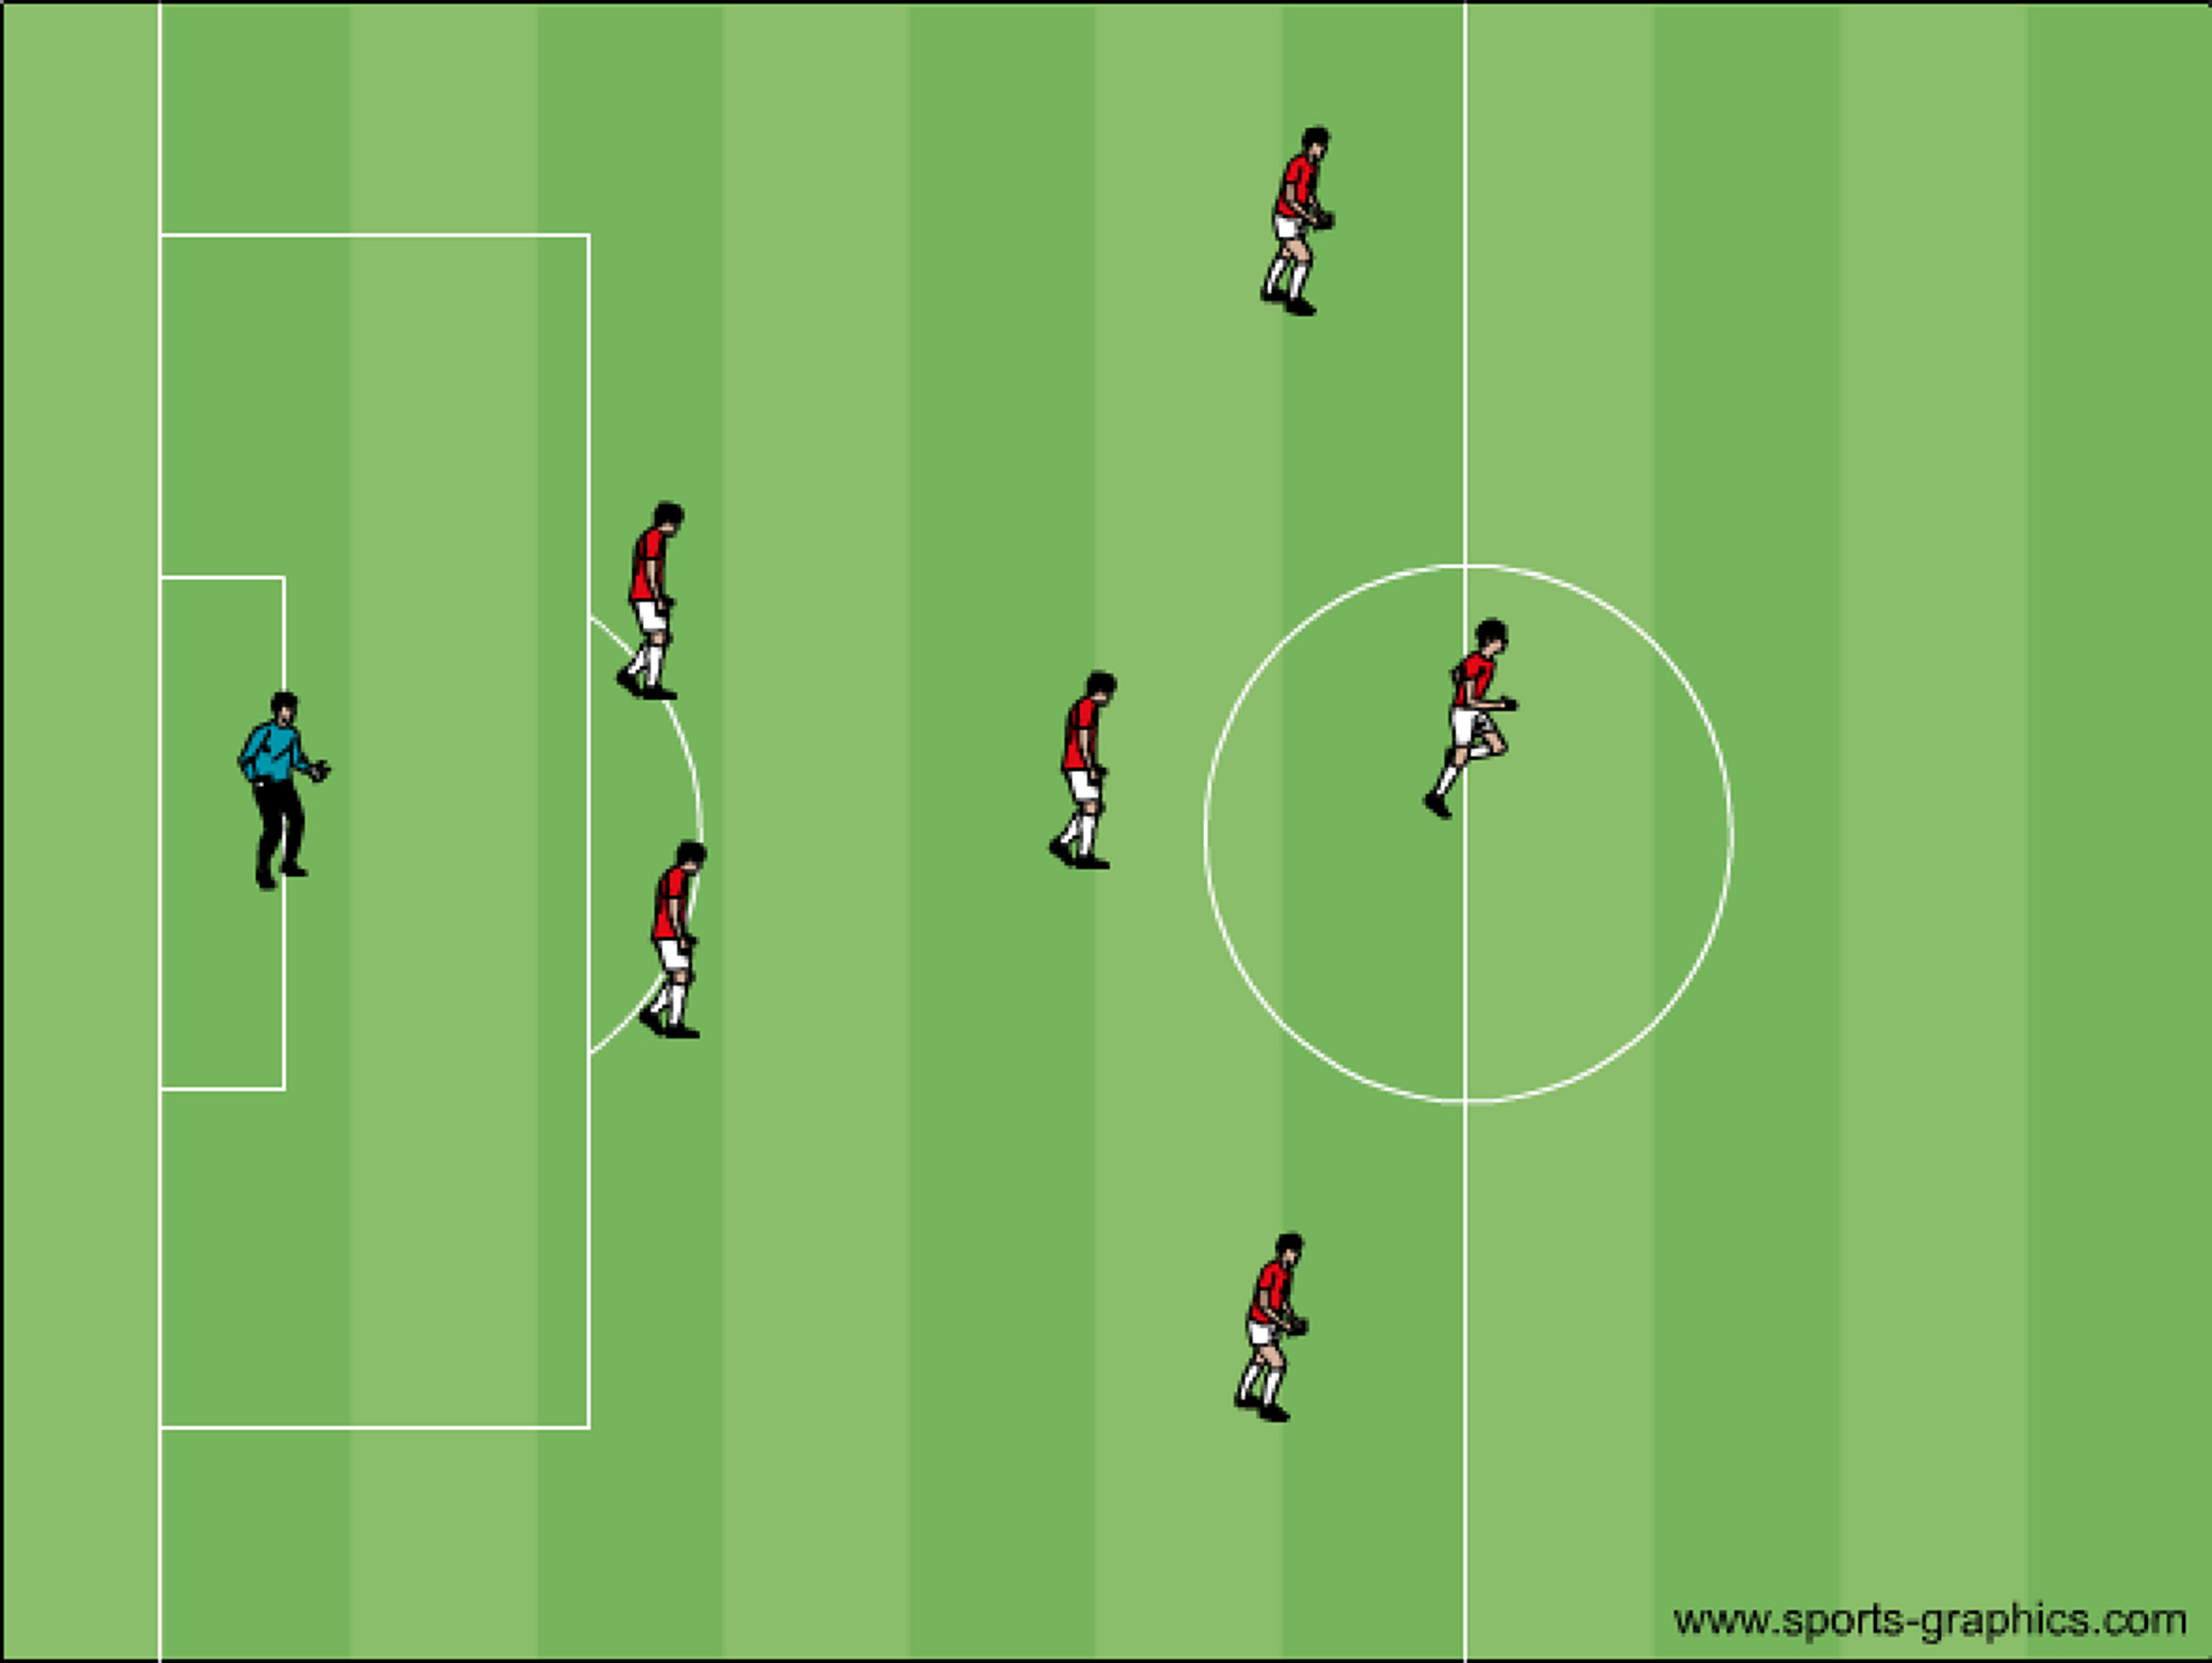 Football/Soccer: 4-4-2 Formation Player Responsibilities (Tactical